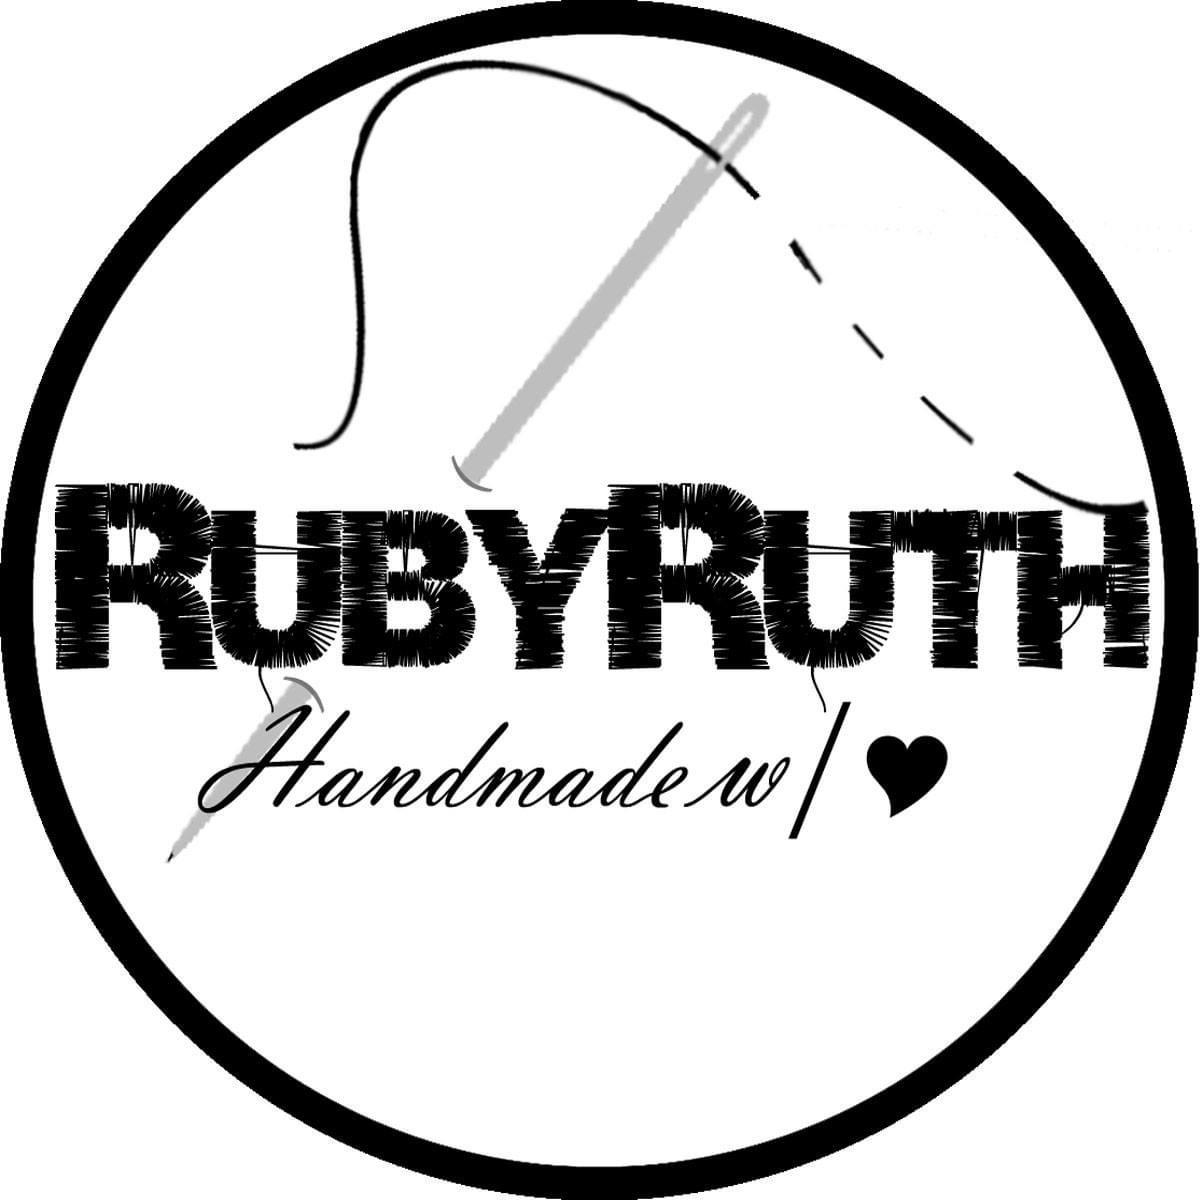 The logo or business face of "RubyRuth"